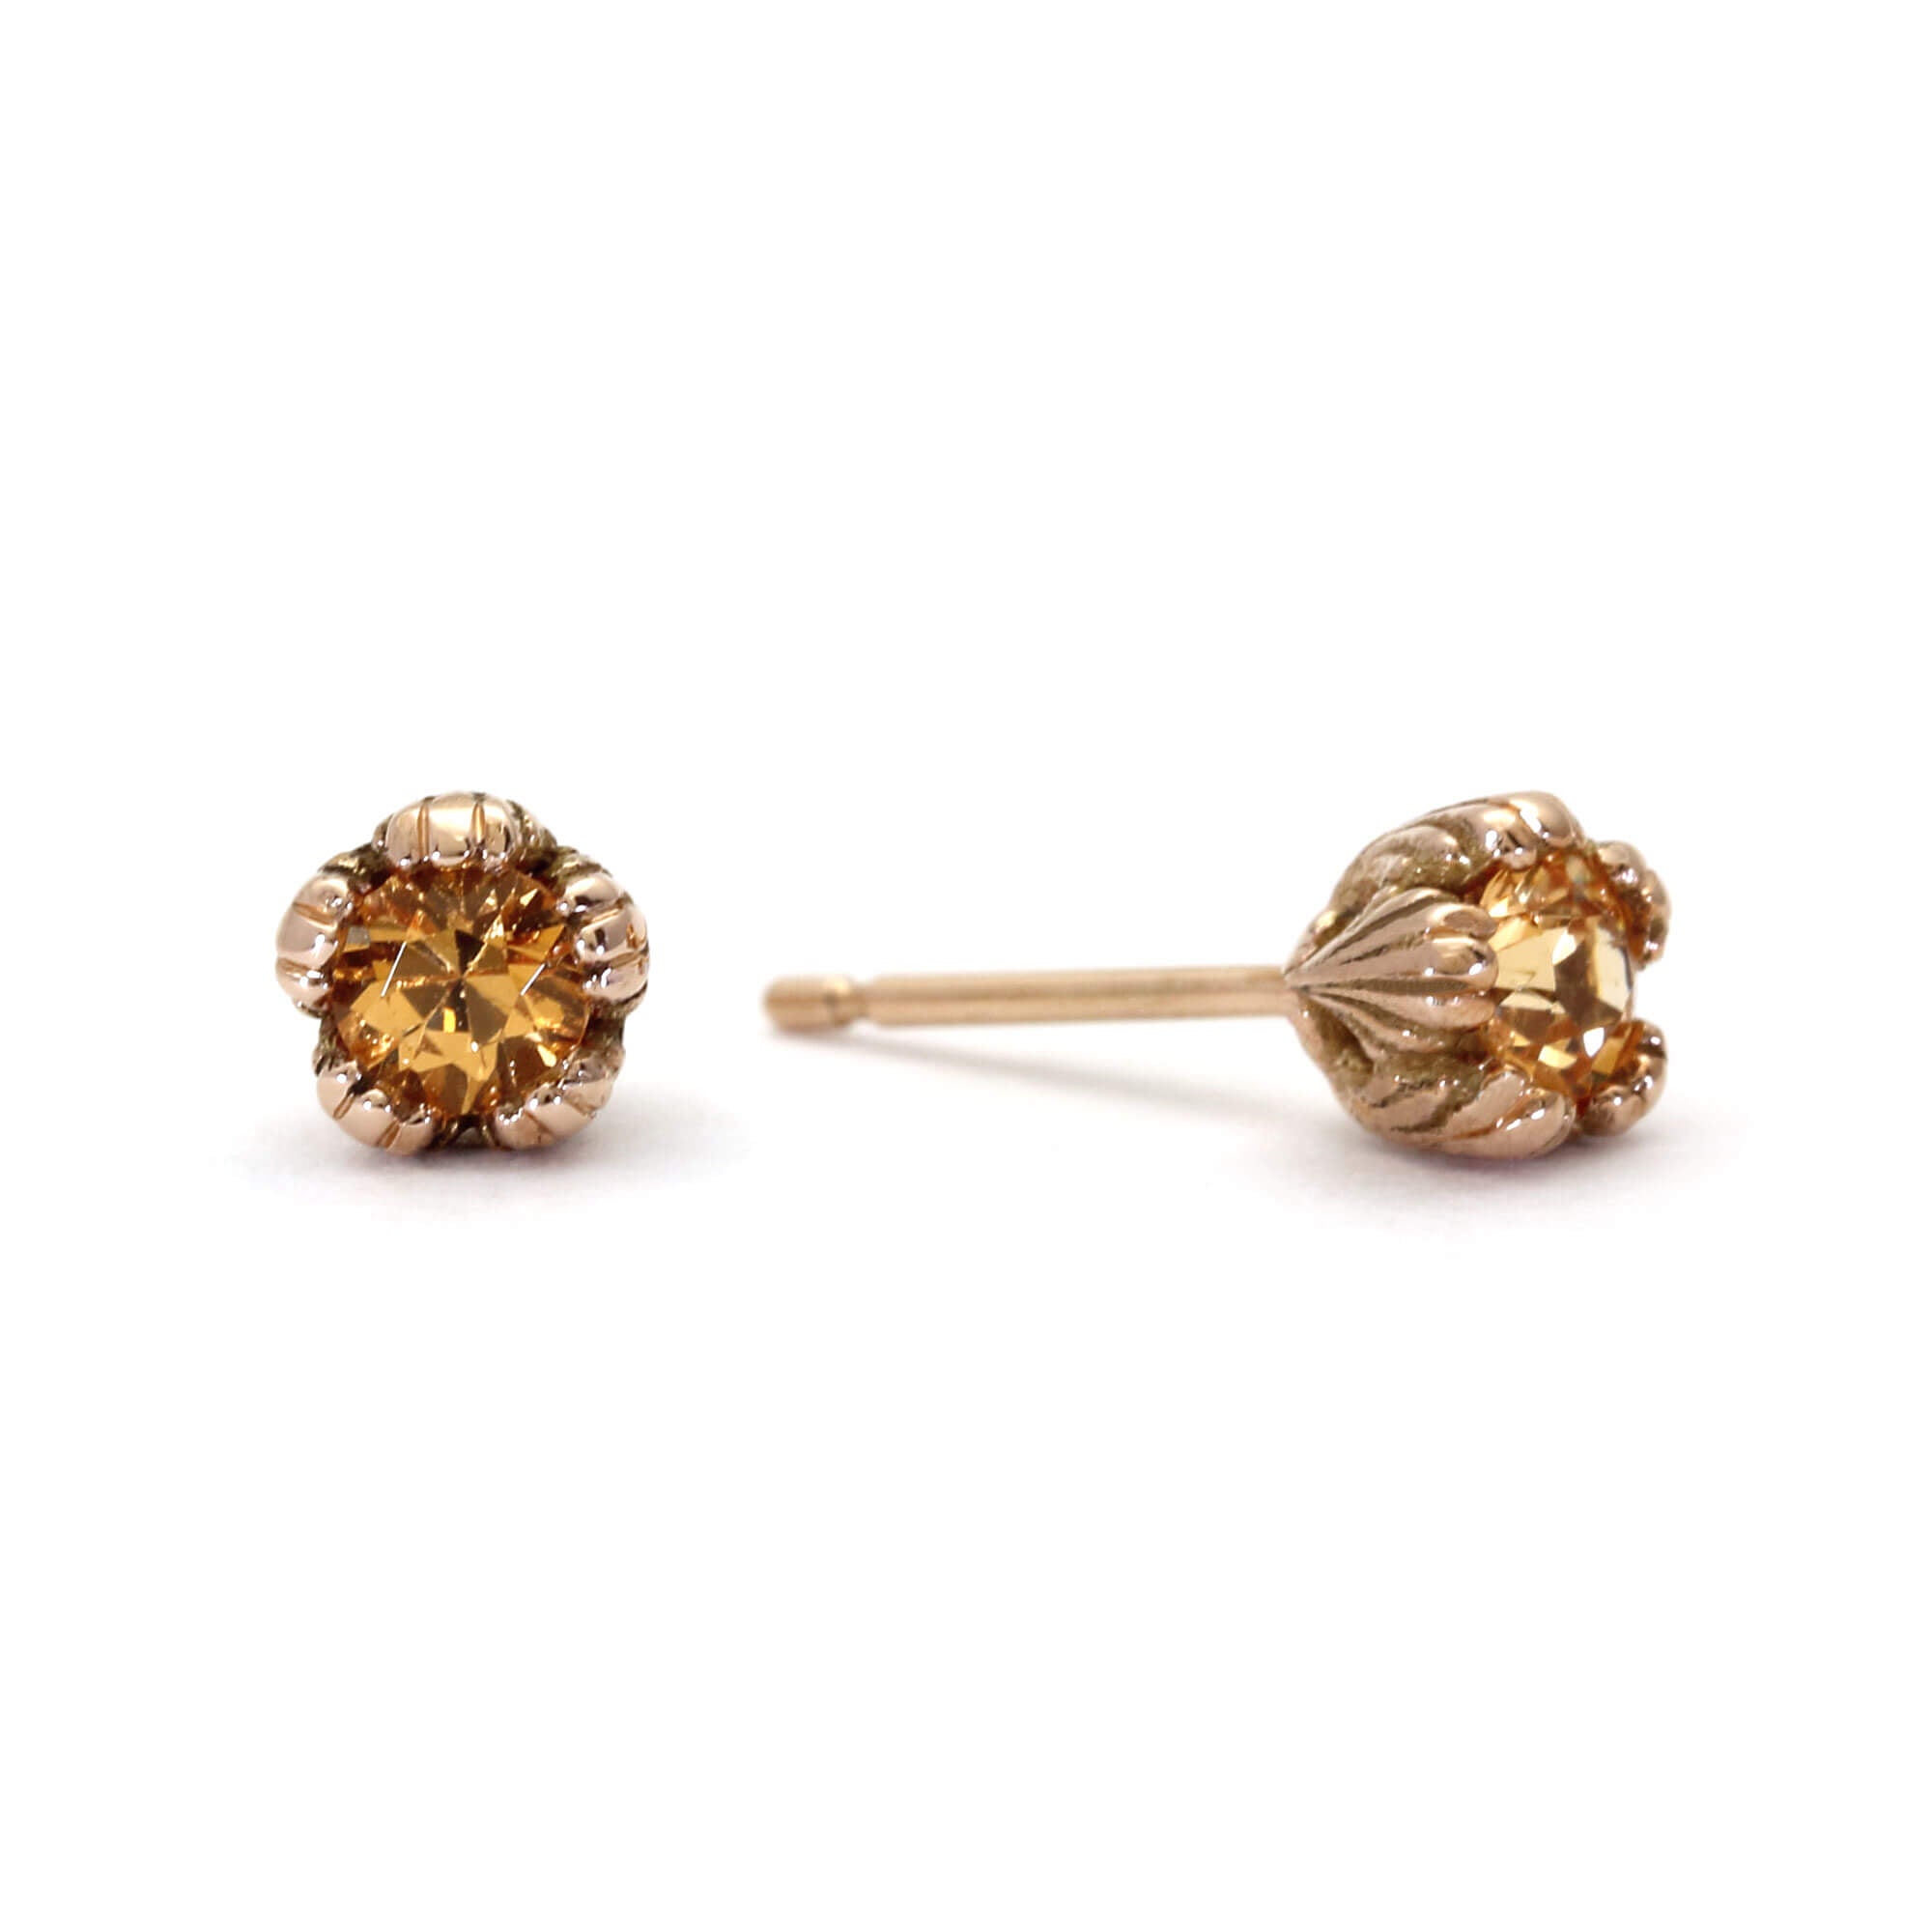 A pair of solid gold and spessartite garnet stud earrings